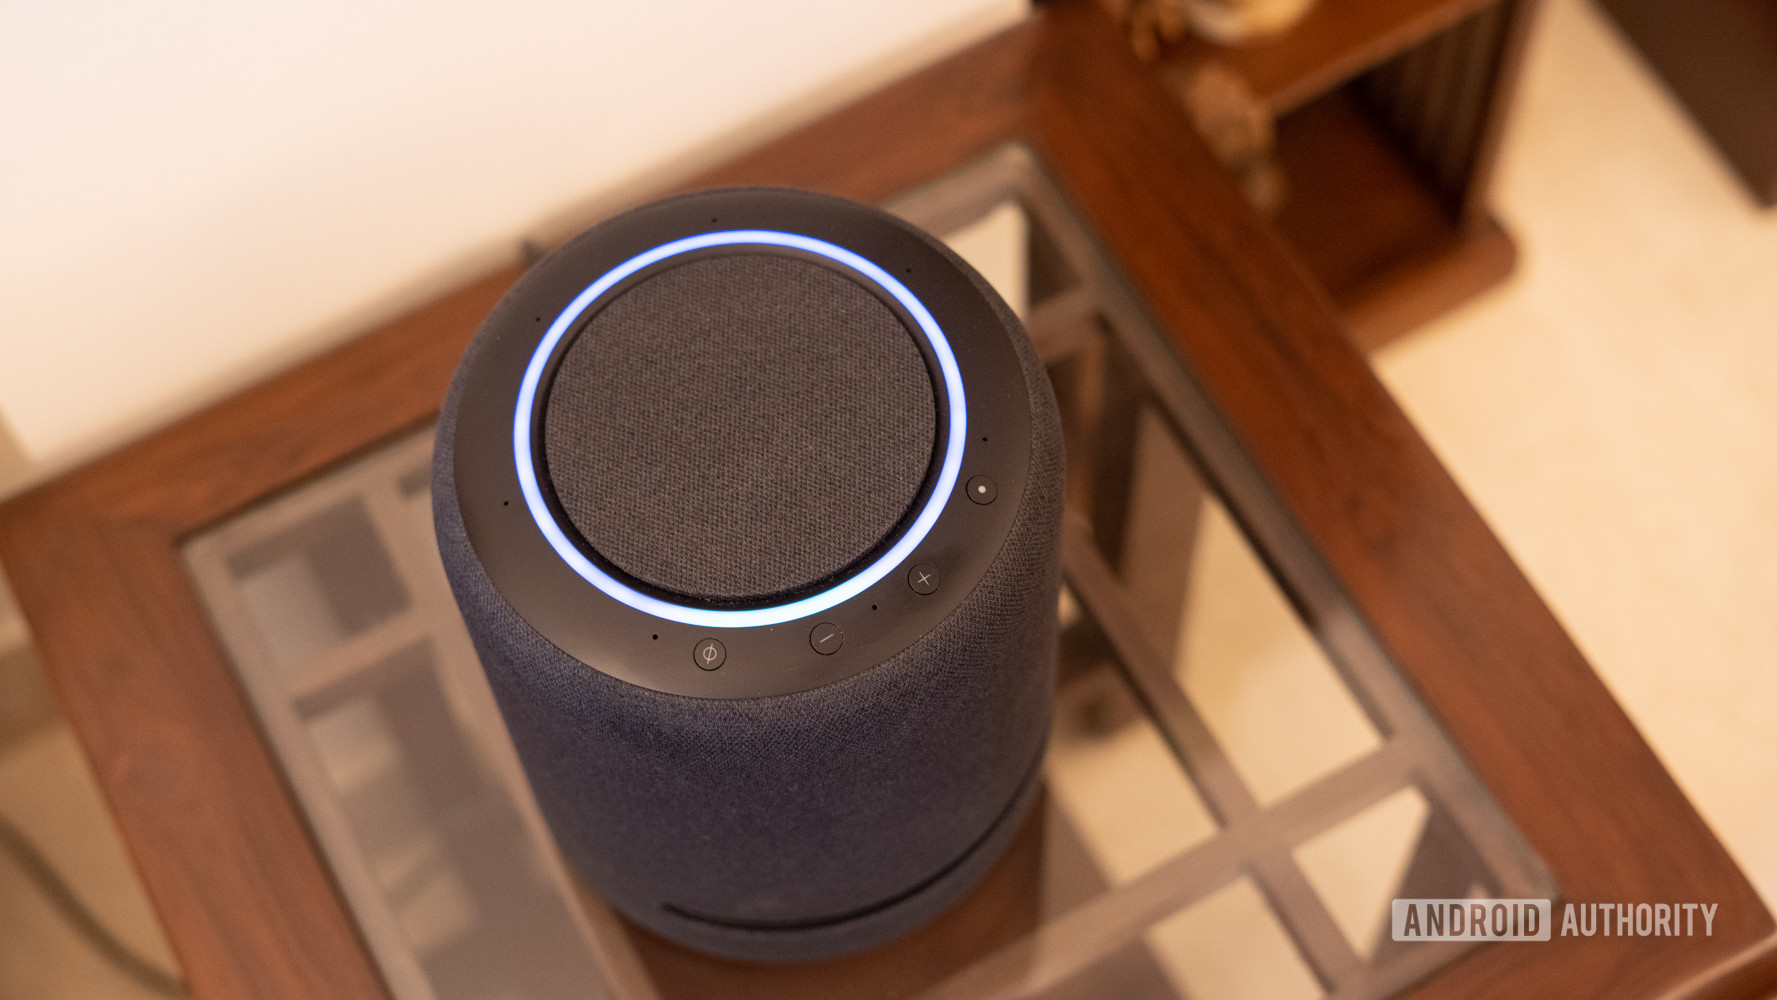 Echo Studio with blue colored ring and control buttons